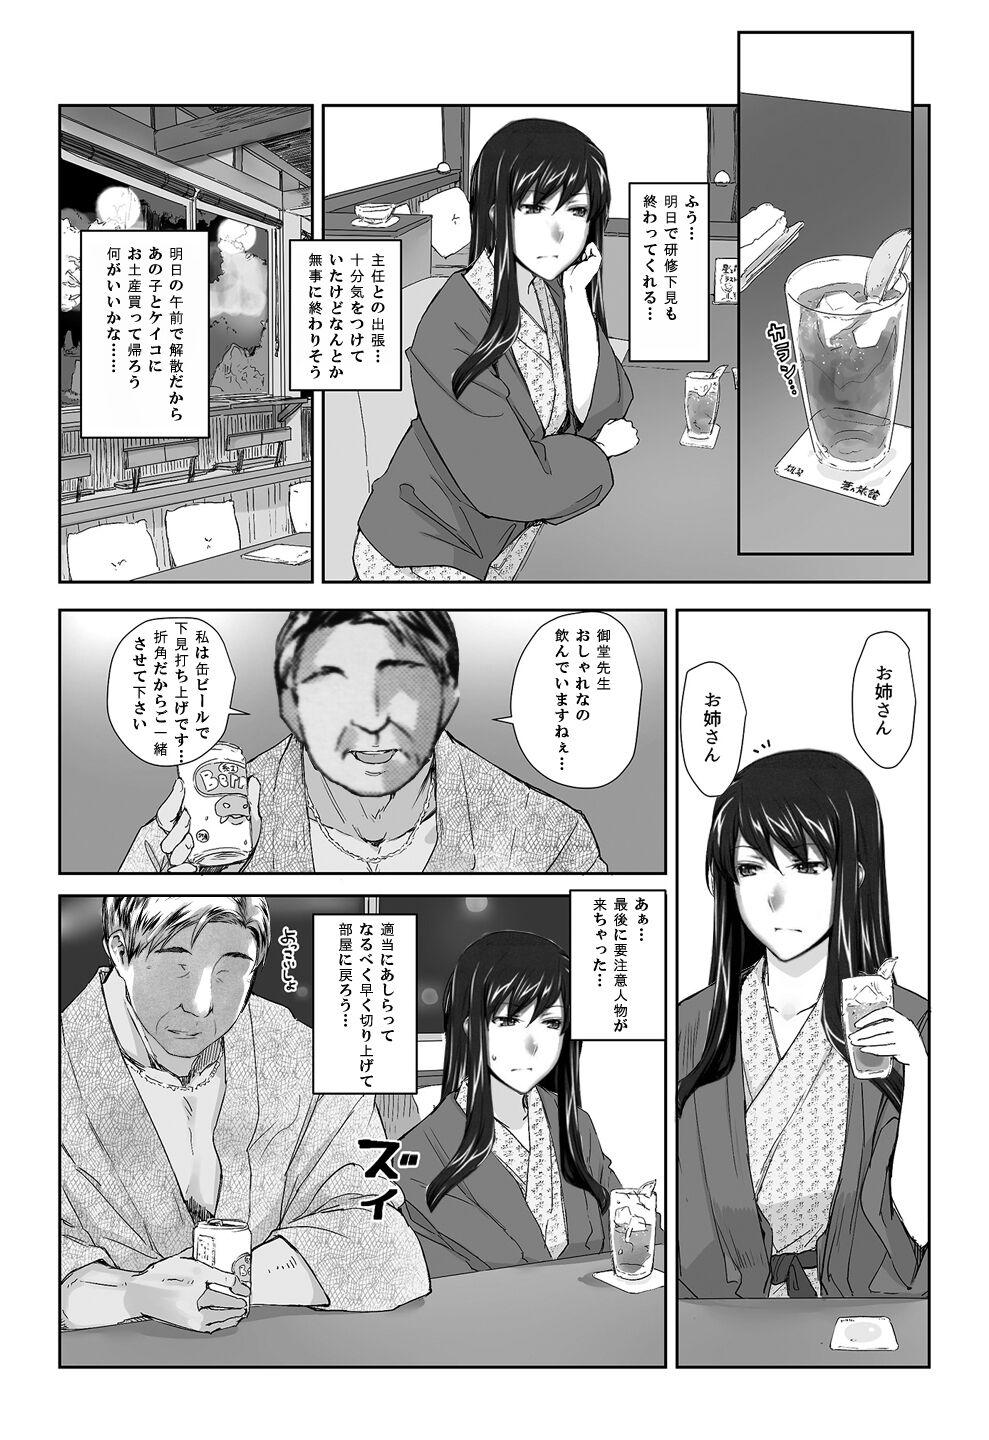 Sakiko-san in delusion Vol.8 revised ~Sakiko-san's circumstance at an educational training Route3~ (collage) (Continue to “First day of study trip” (page 42) of Vol.1) 2